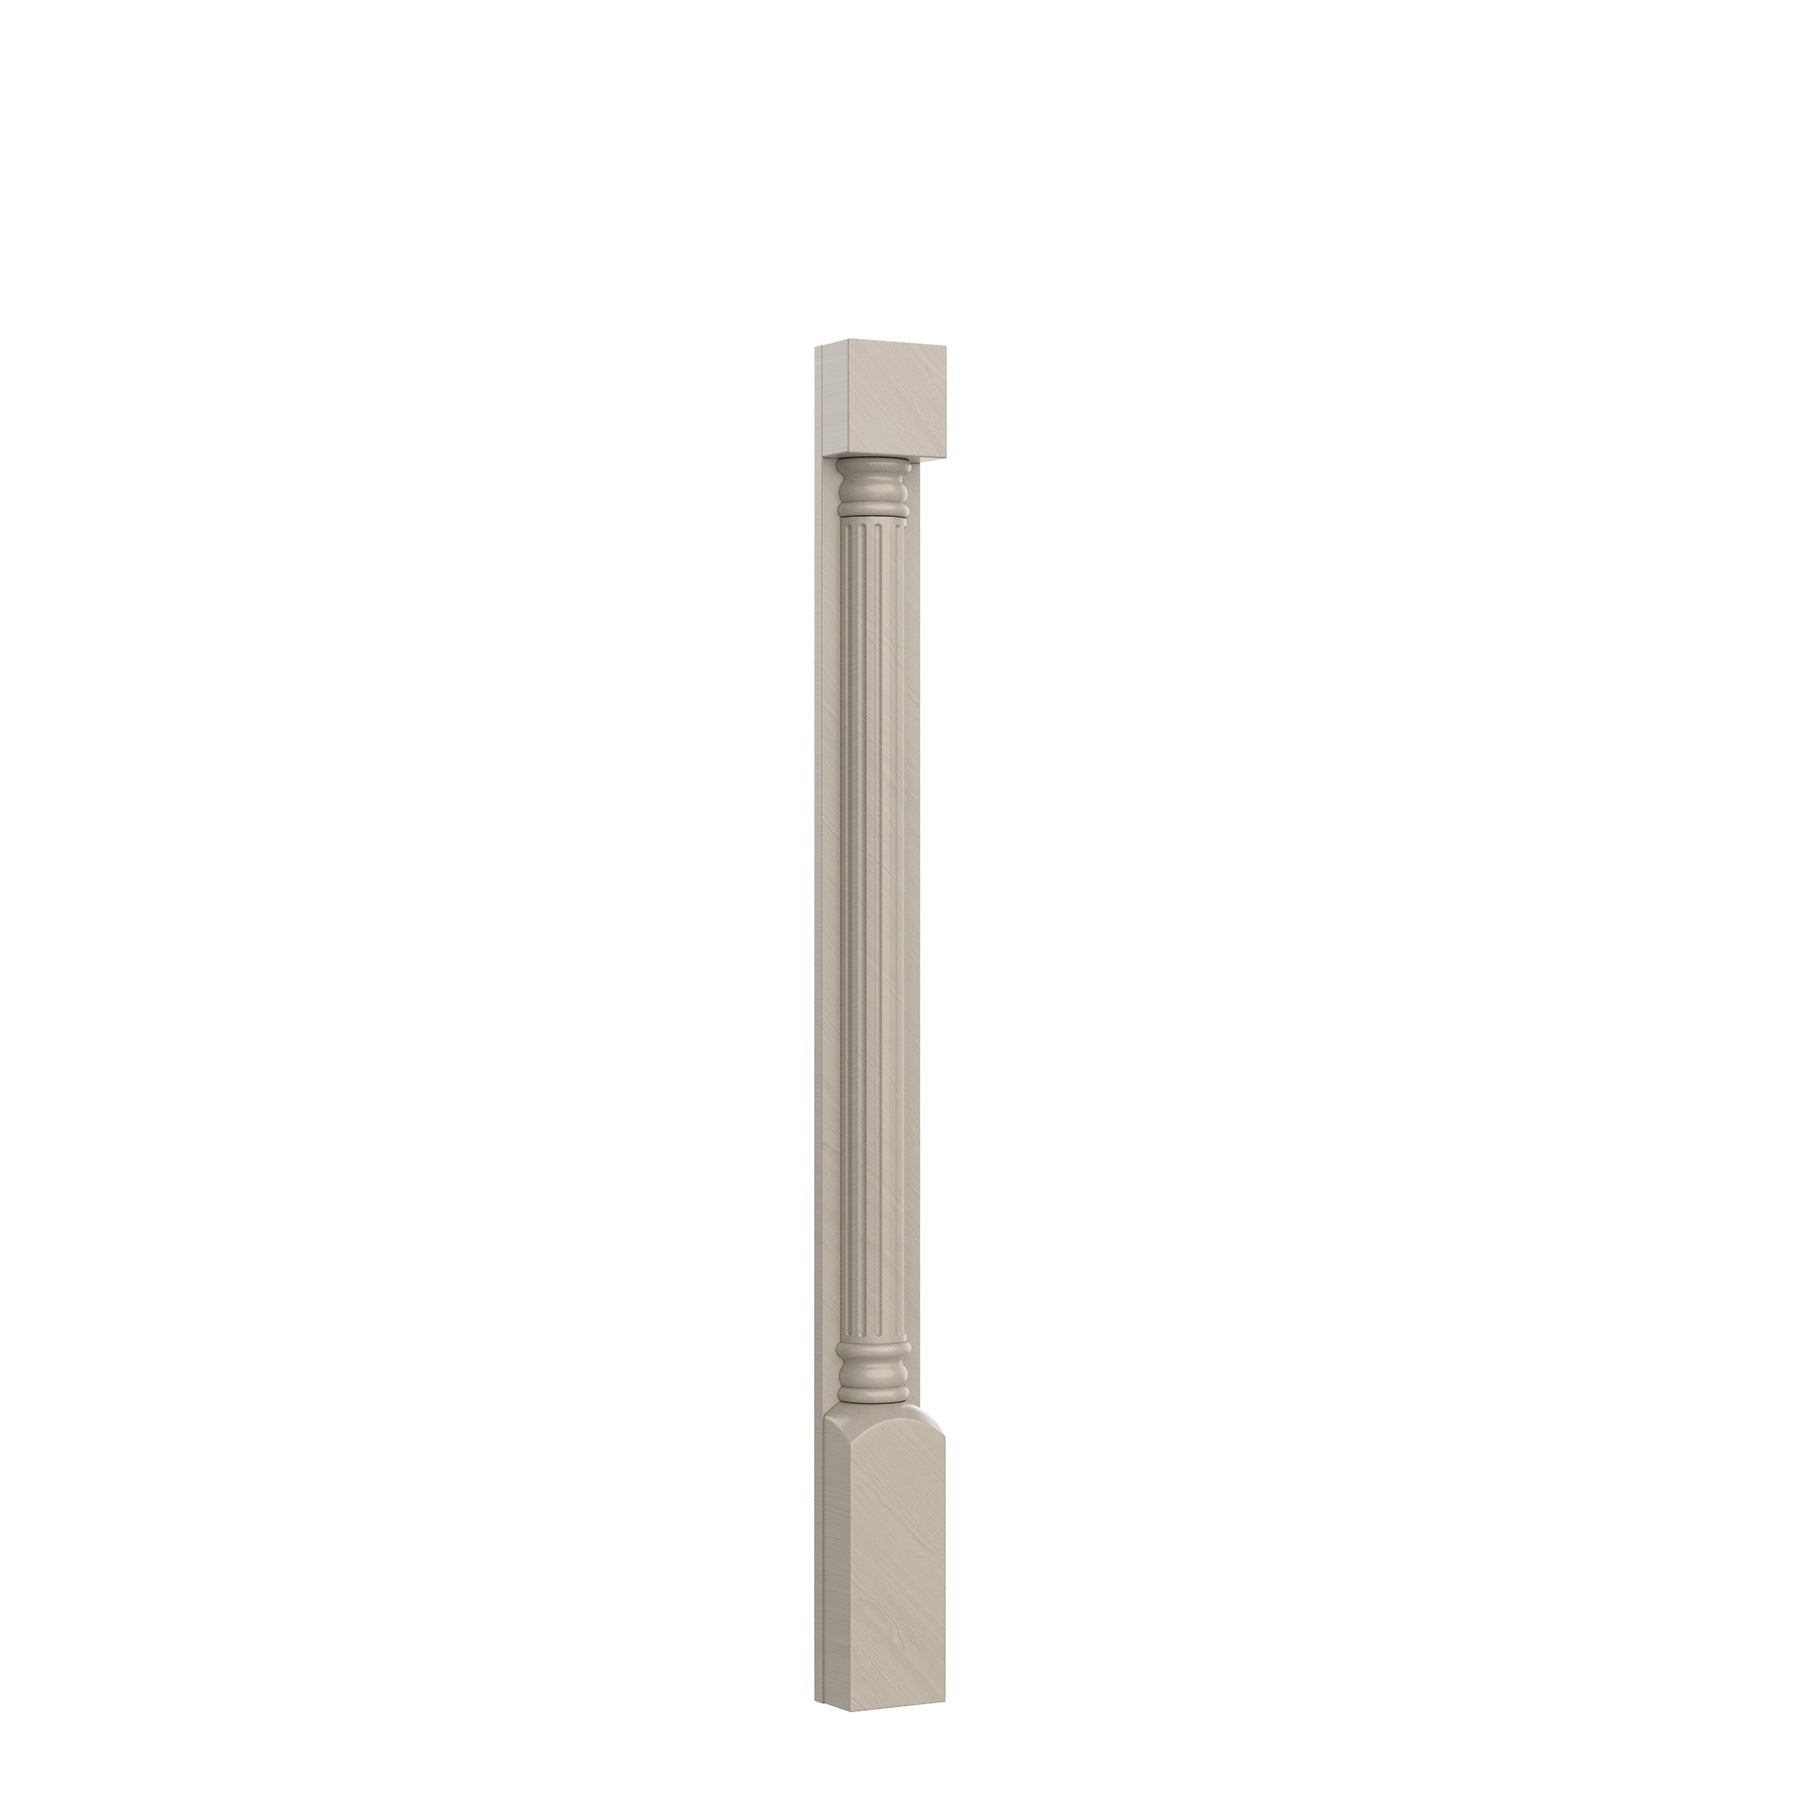 RTA - Spindle - Fluted | 2.5"W x 42"H x 0.5"D - Richmond Stone